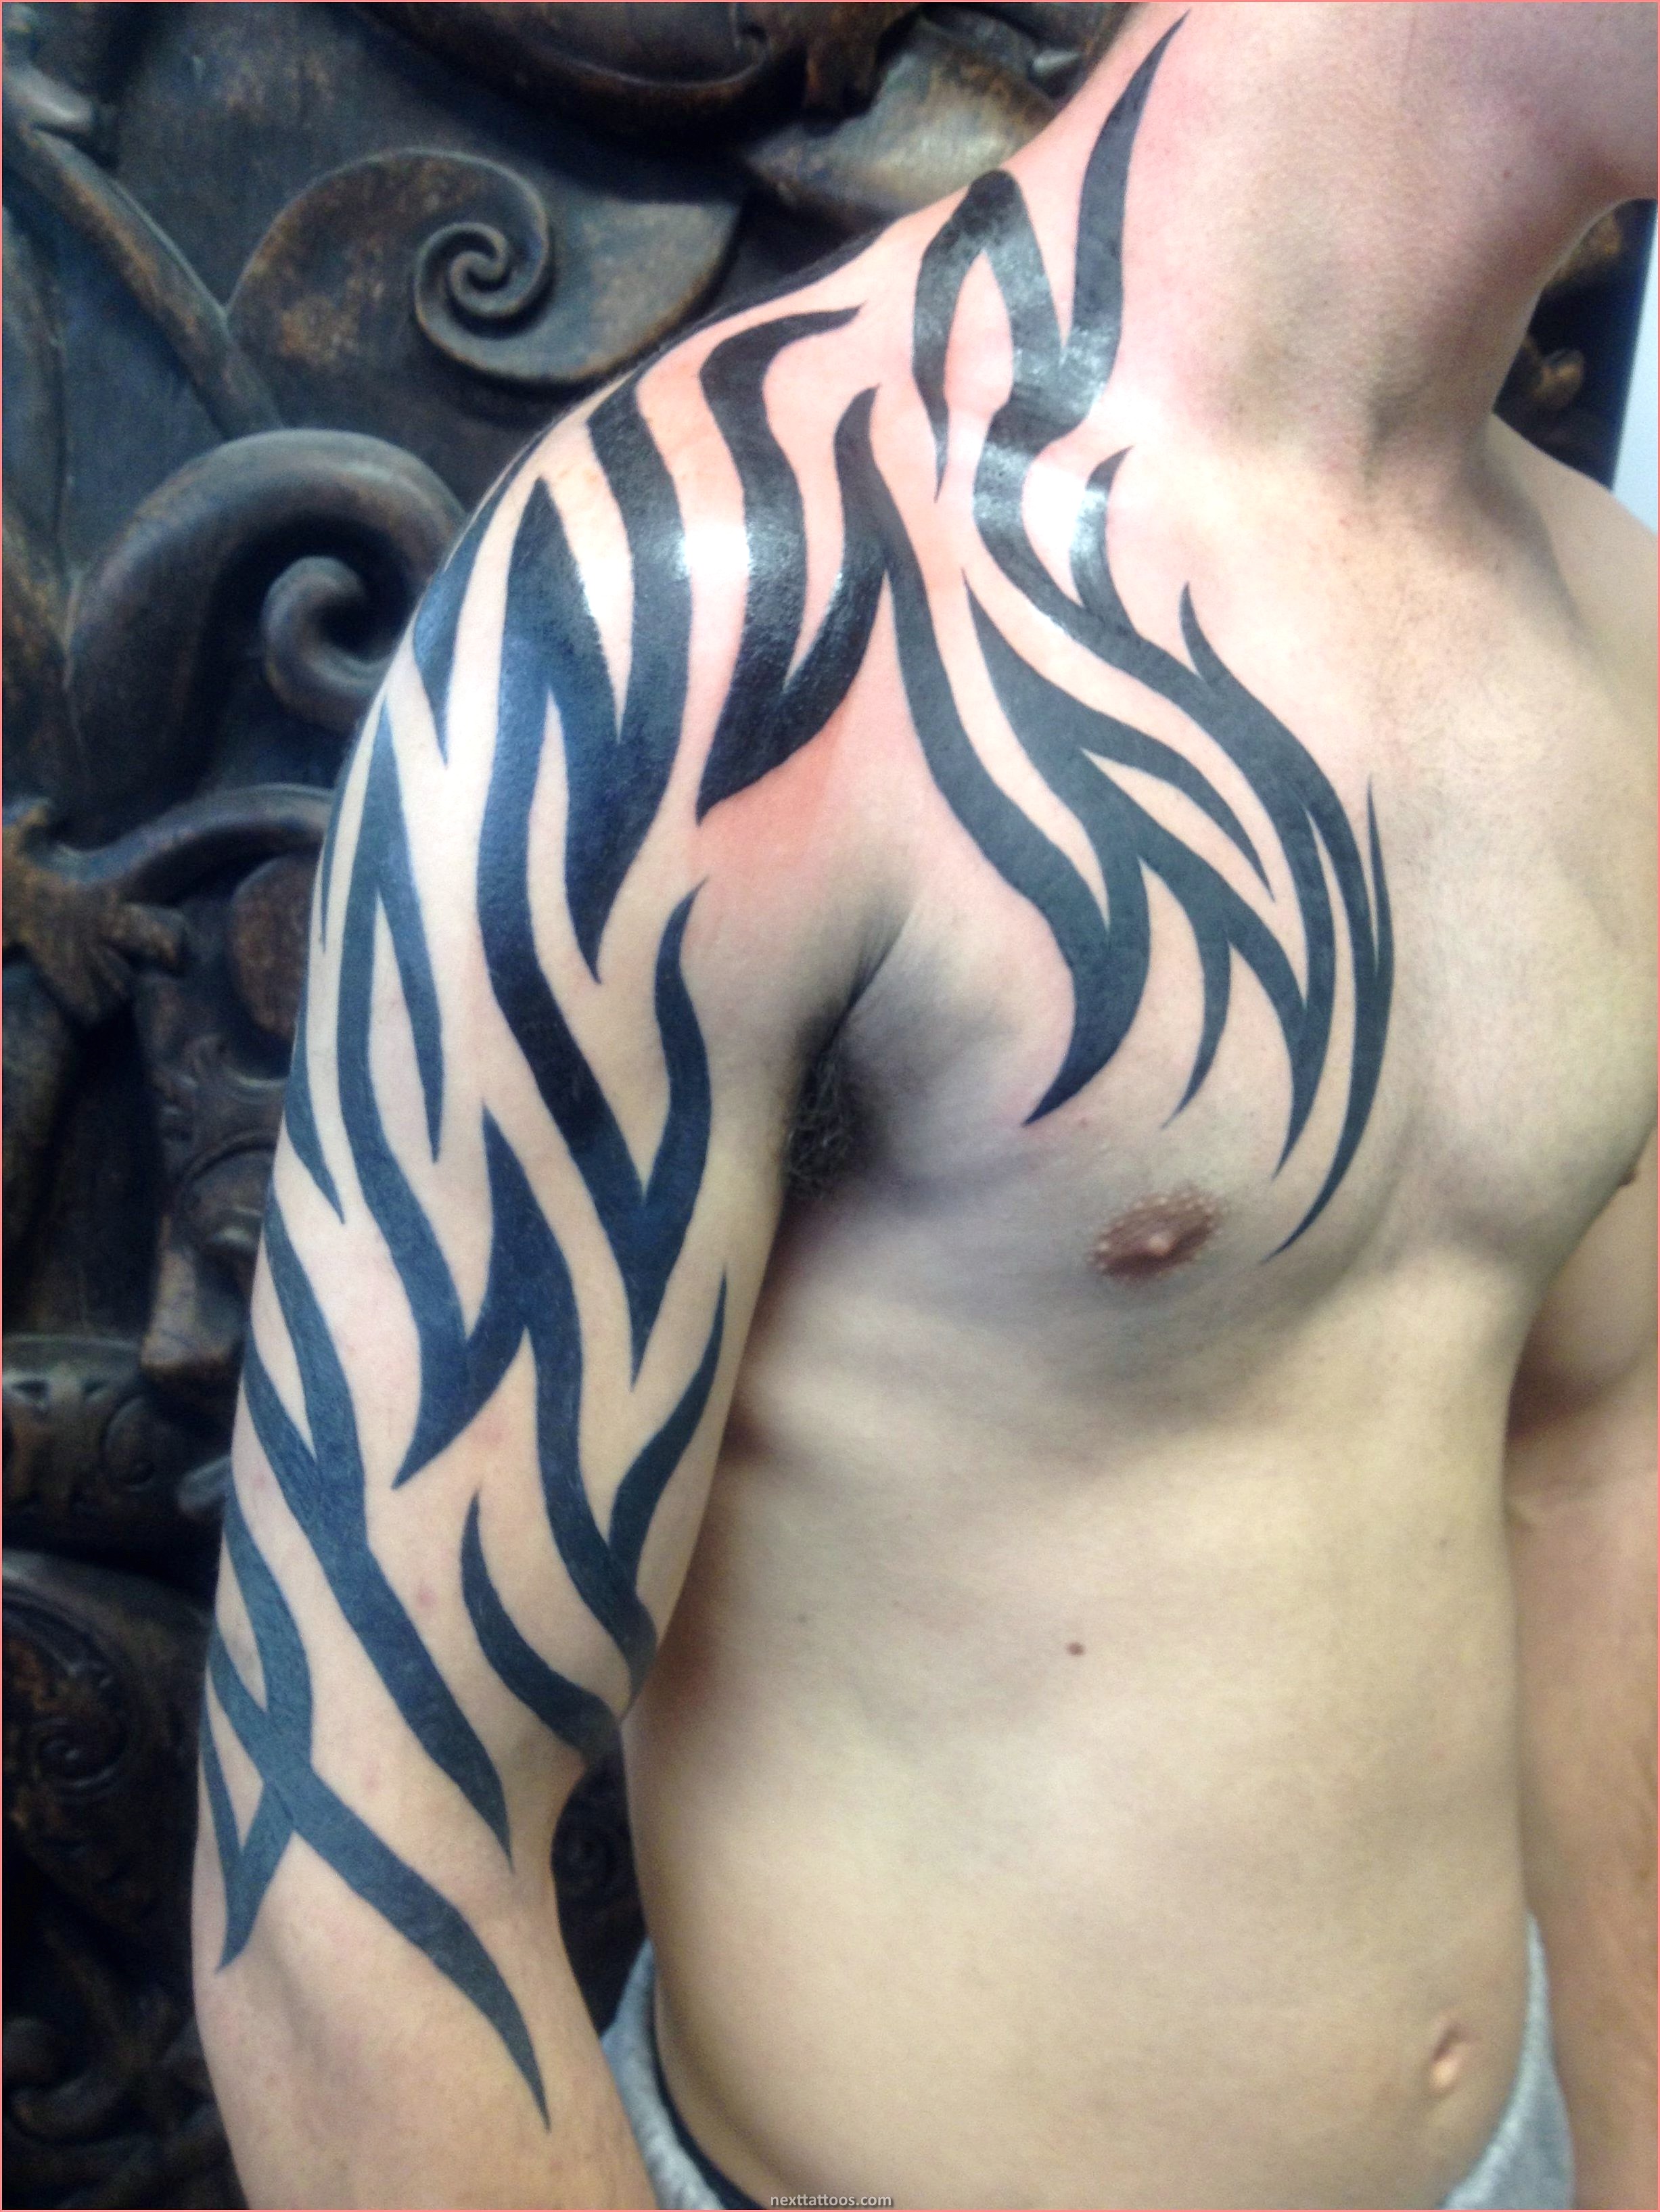 Male Arm Tattoos Pictures - The Best Designs For Your First Tattoo